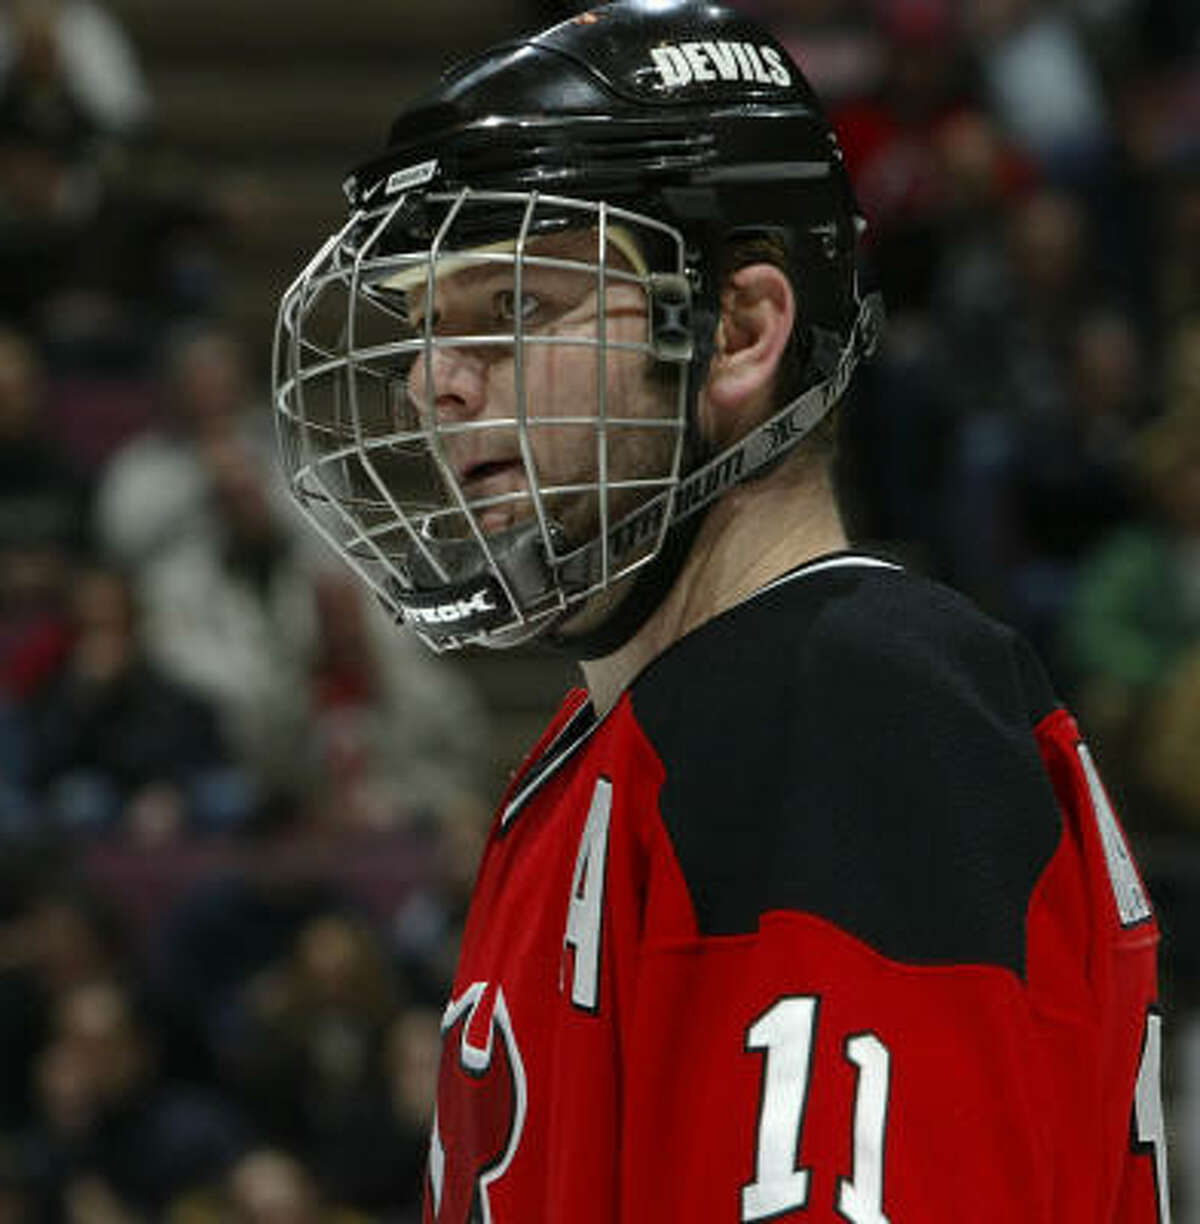 Devils center John Madden returned Friday after missing one game with a facial laceration; he had a protective cage mask attached to his helmet.